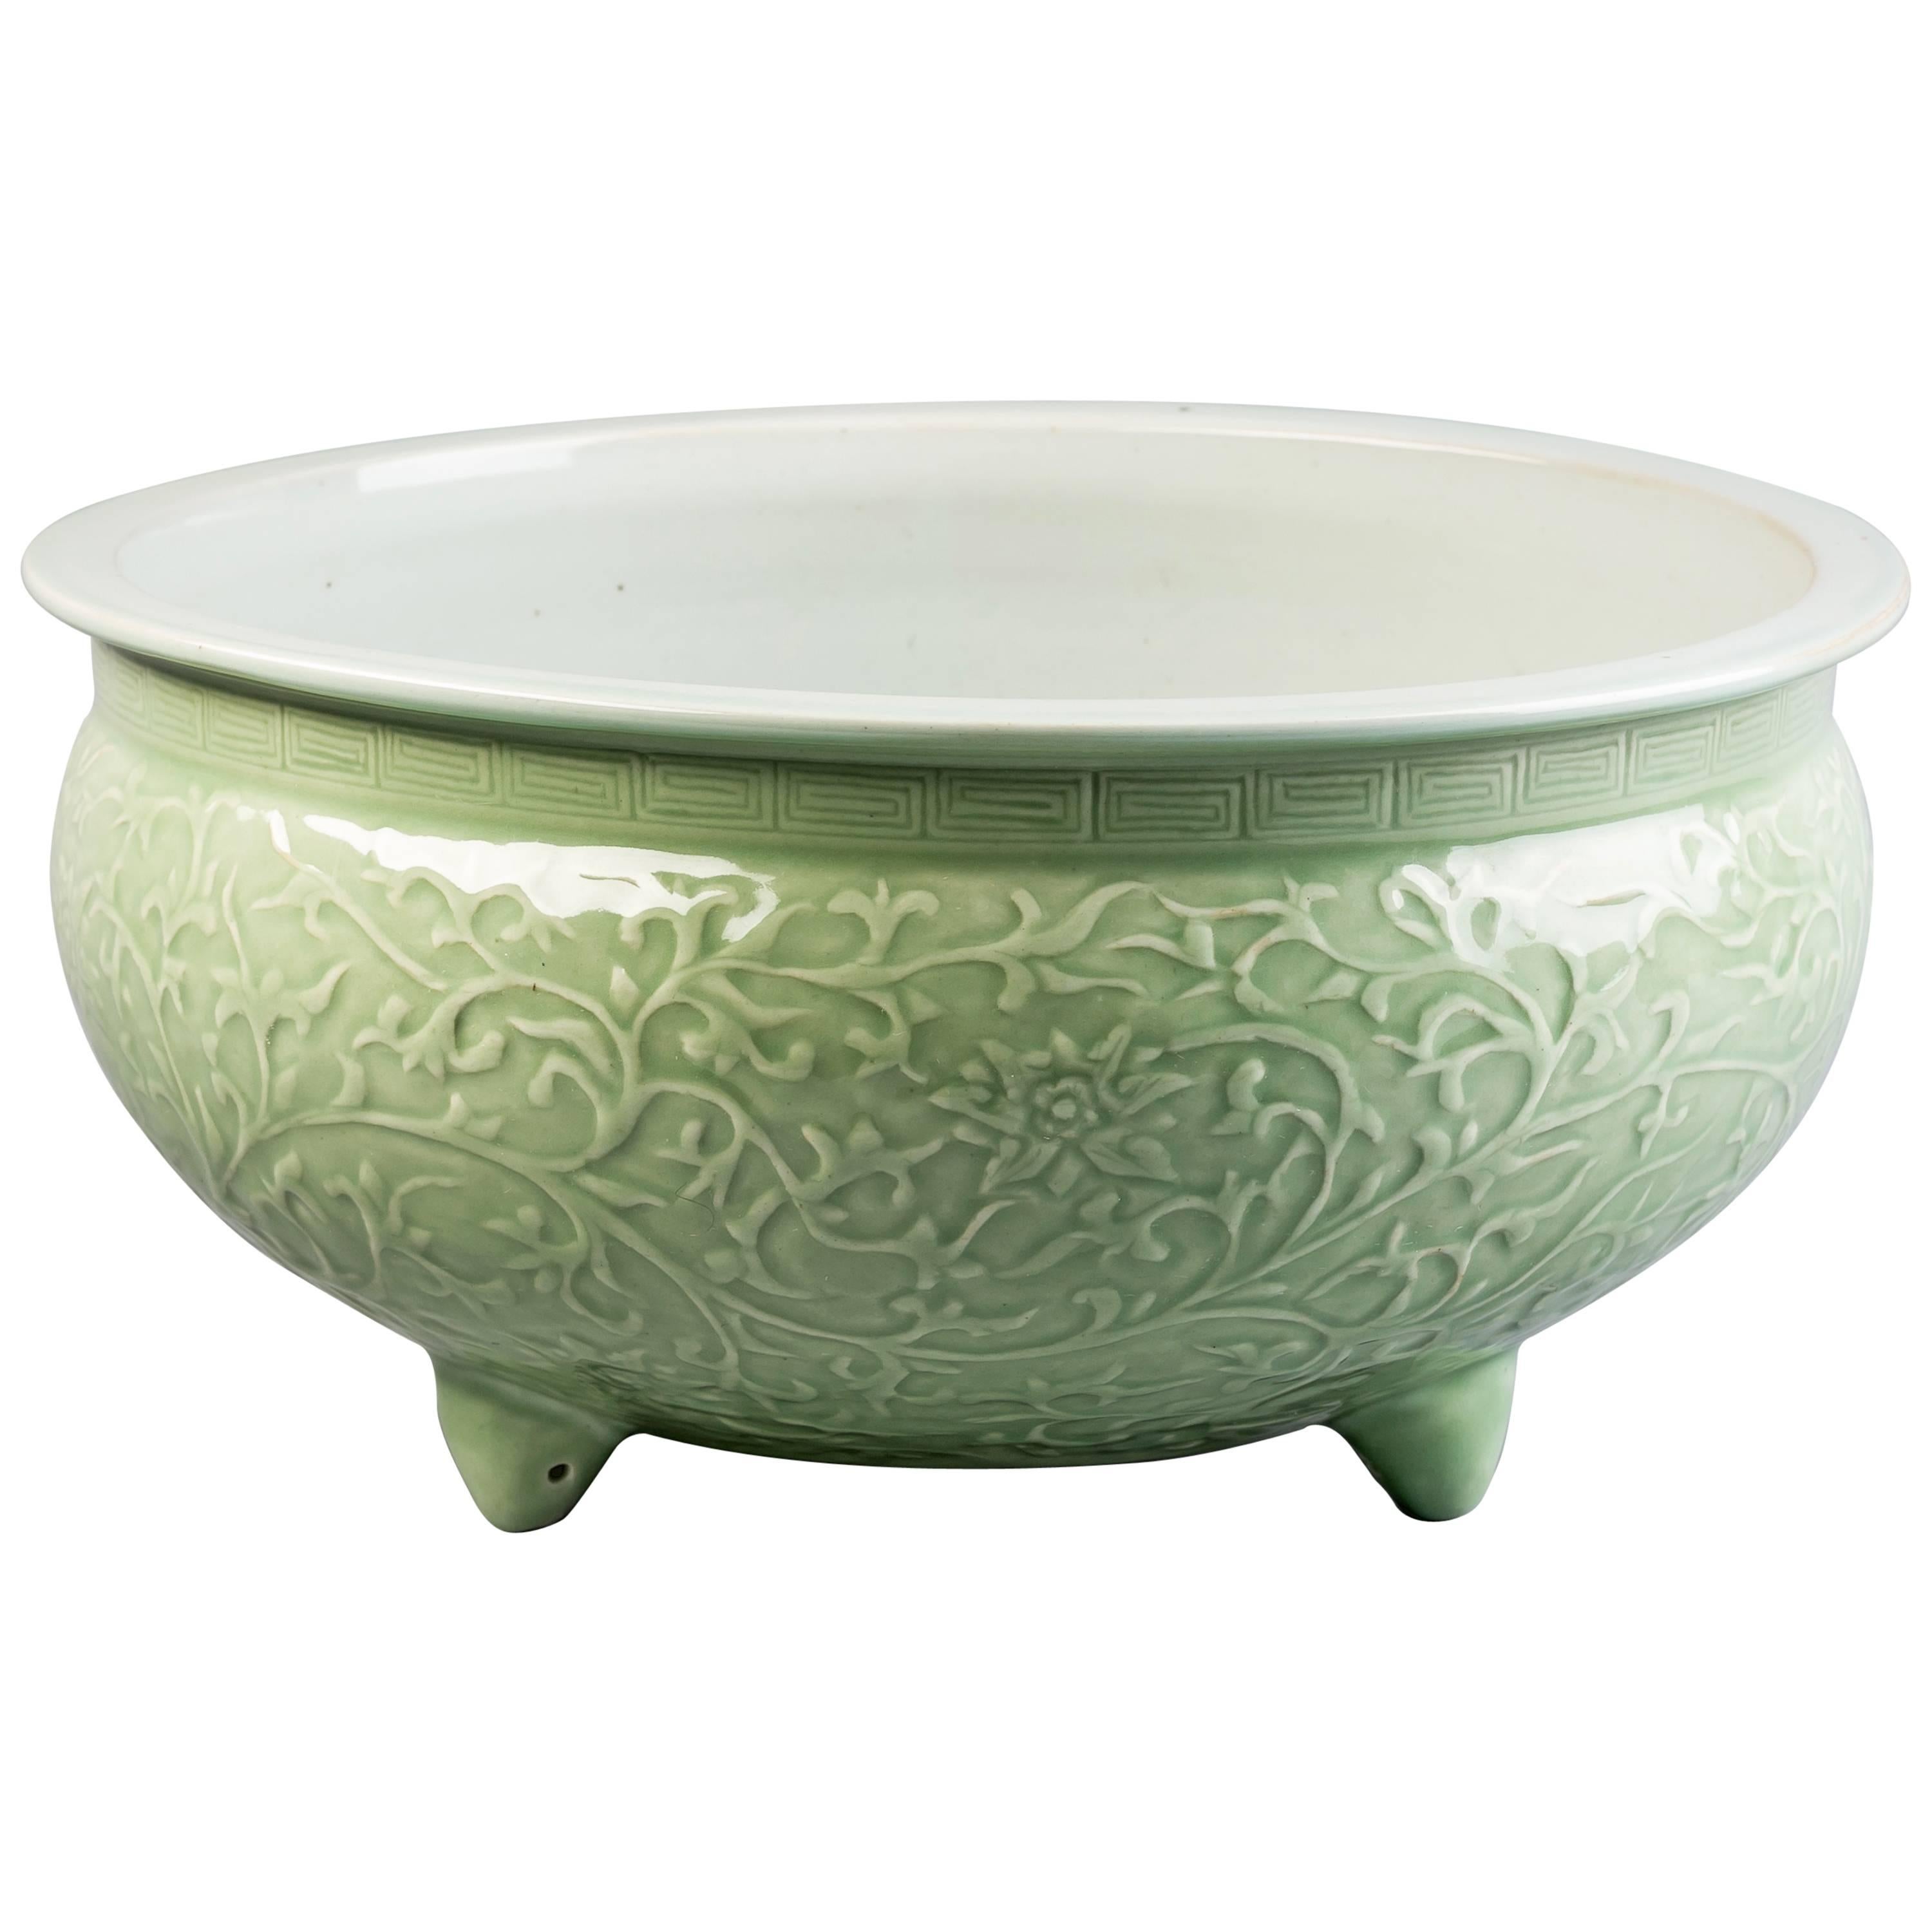 Chinese Celadon Footed Centerpiece, 19th Century